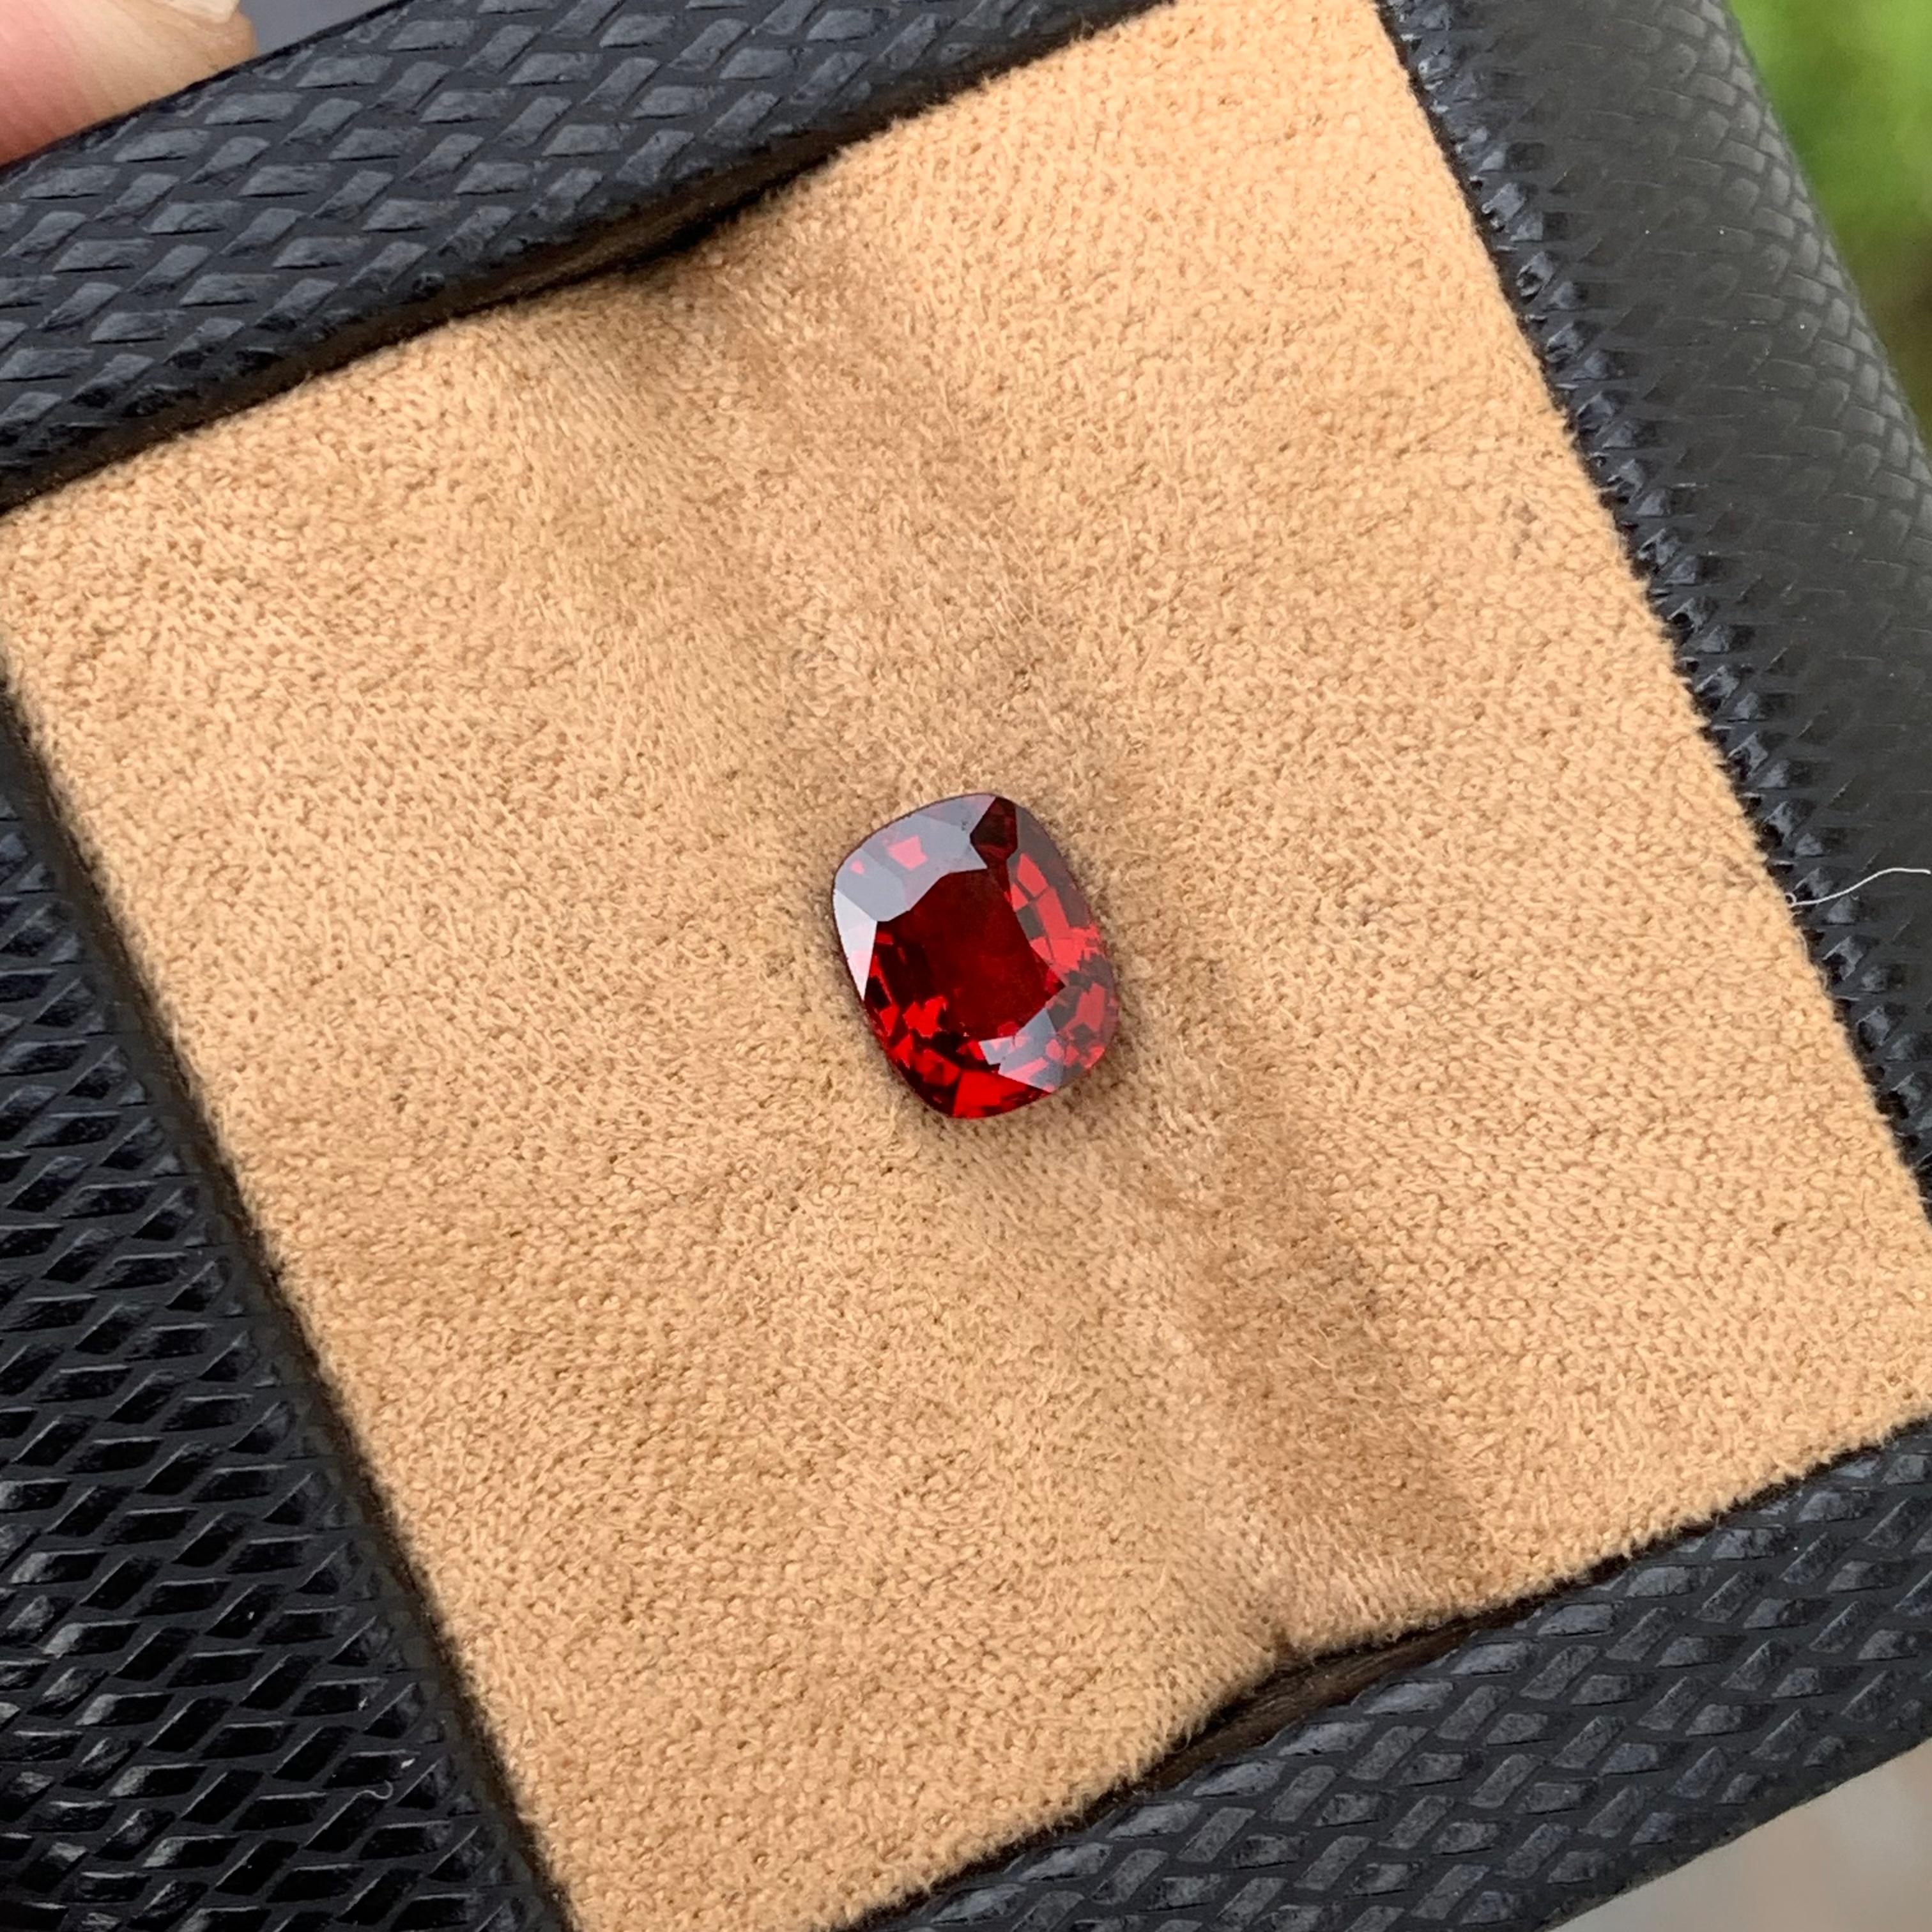 Beautiful 1.45 Carat Natural Loose Red Spinel From Burma Myanmar Cushion Shape For Sale 10